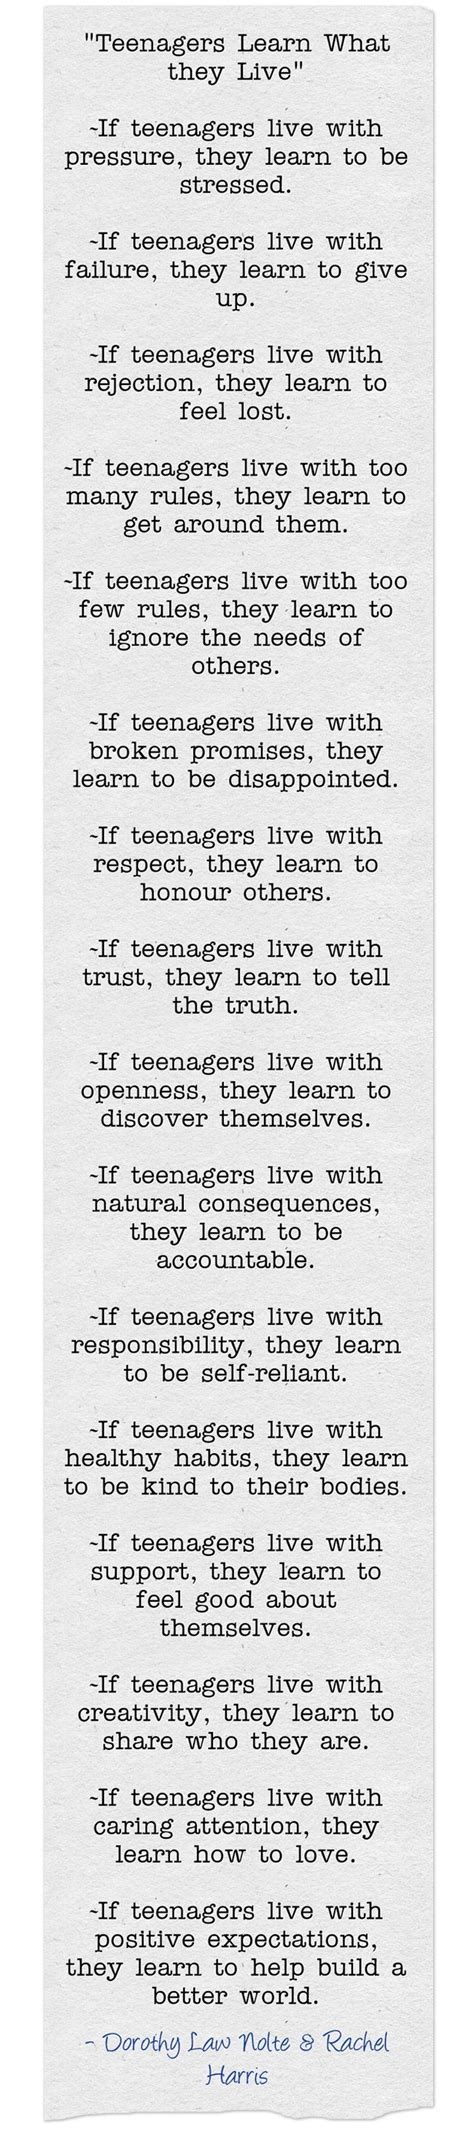 Teenagers Learn What They Live Poem By Dorothy Law